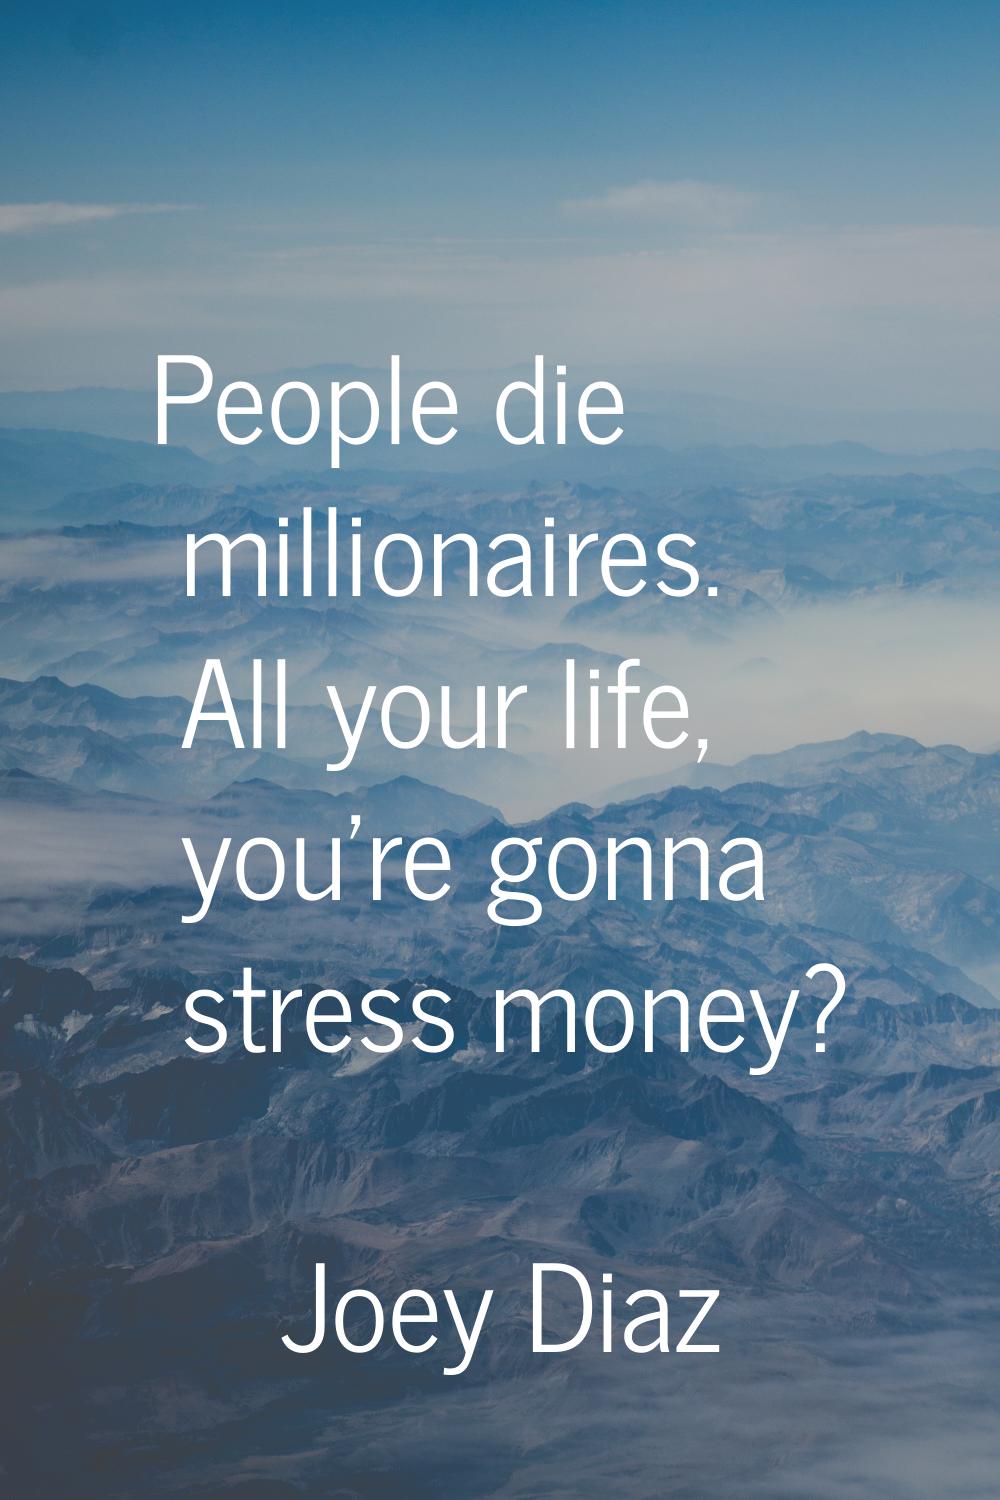 People die millionaires. All your life, you're gonna stress money?